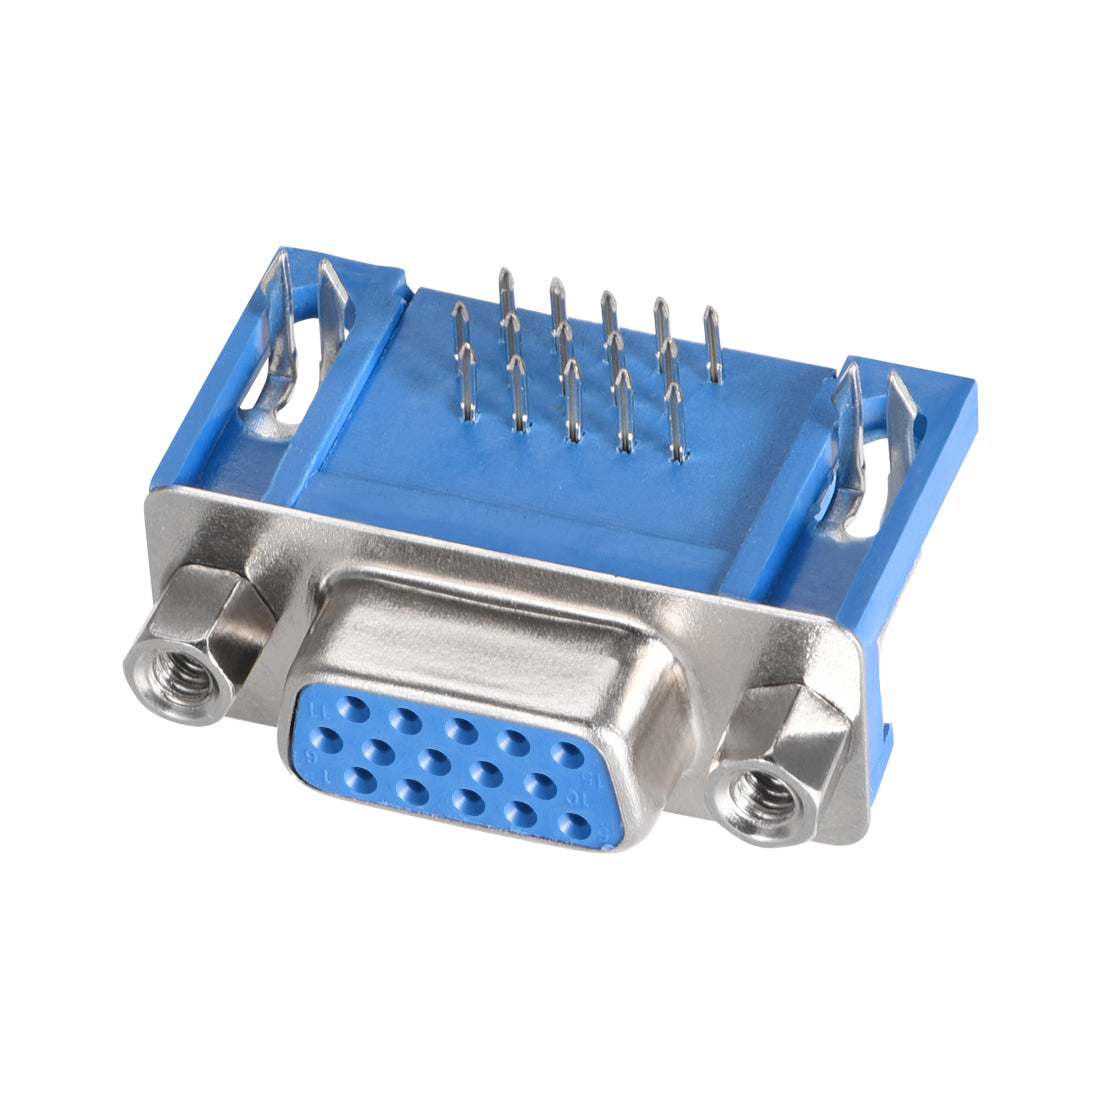 uxcell Uxcell D-sub Connector Female Socket 15-pin 3-row Right Angle Port Terminal Breakout for Mechanical Equipment Blue 10pcs